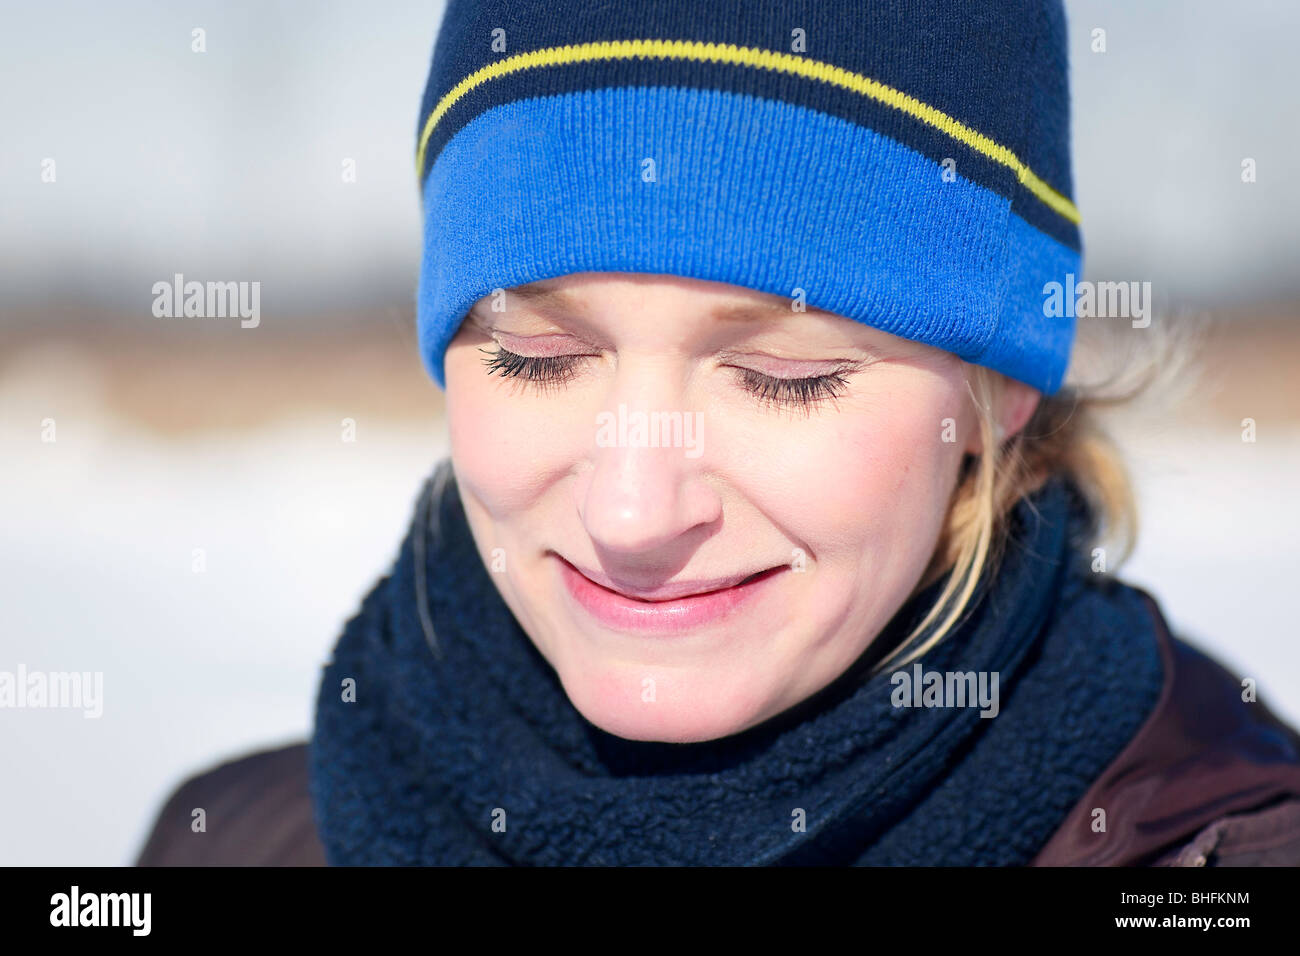 Portrait of a woman laughing outdoors in winter, Winnipeg, Manitoba, Canada. Stock Photo